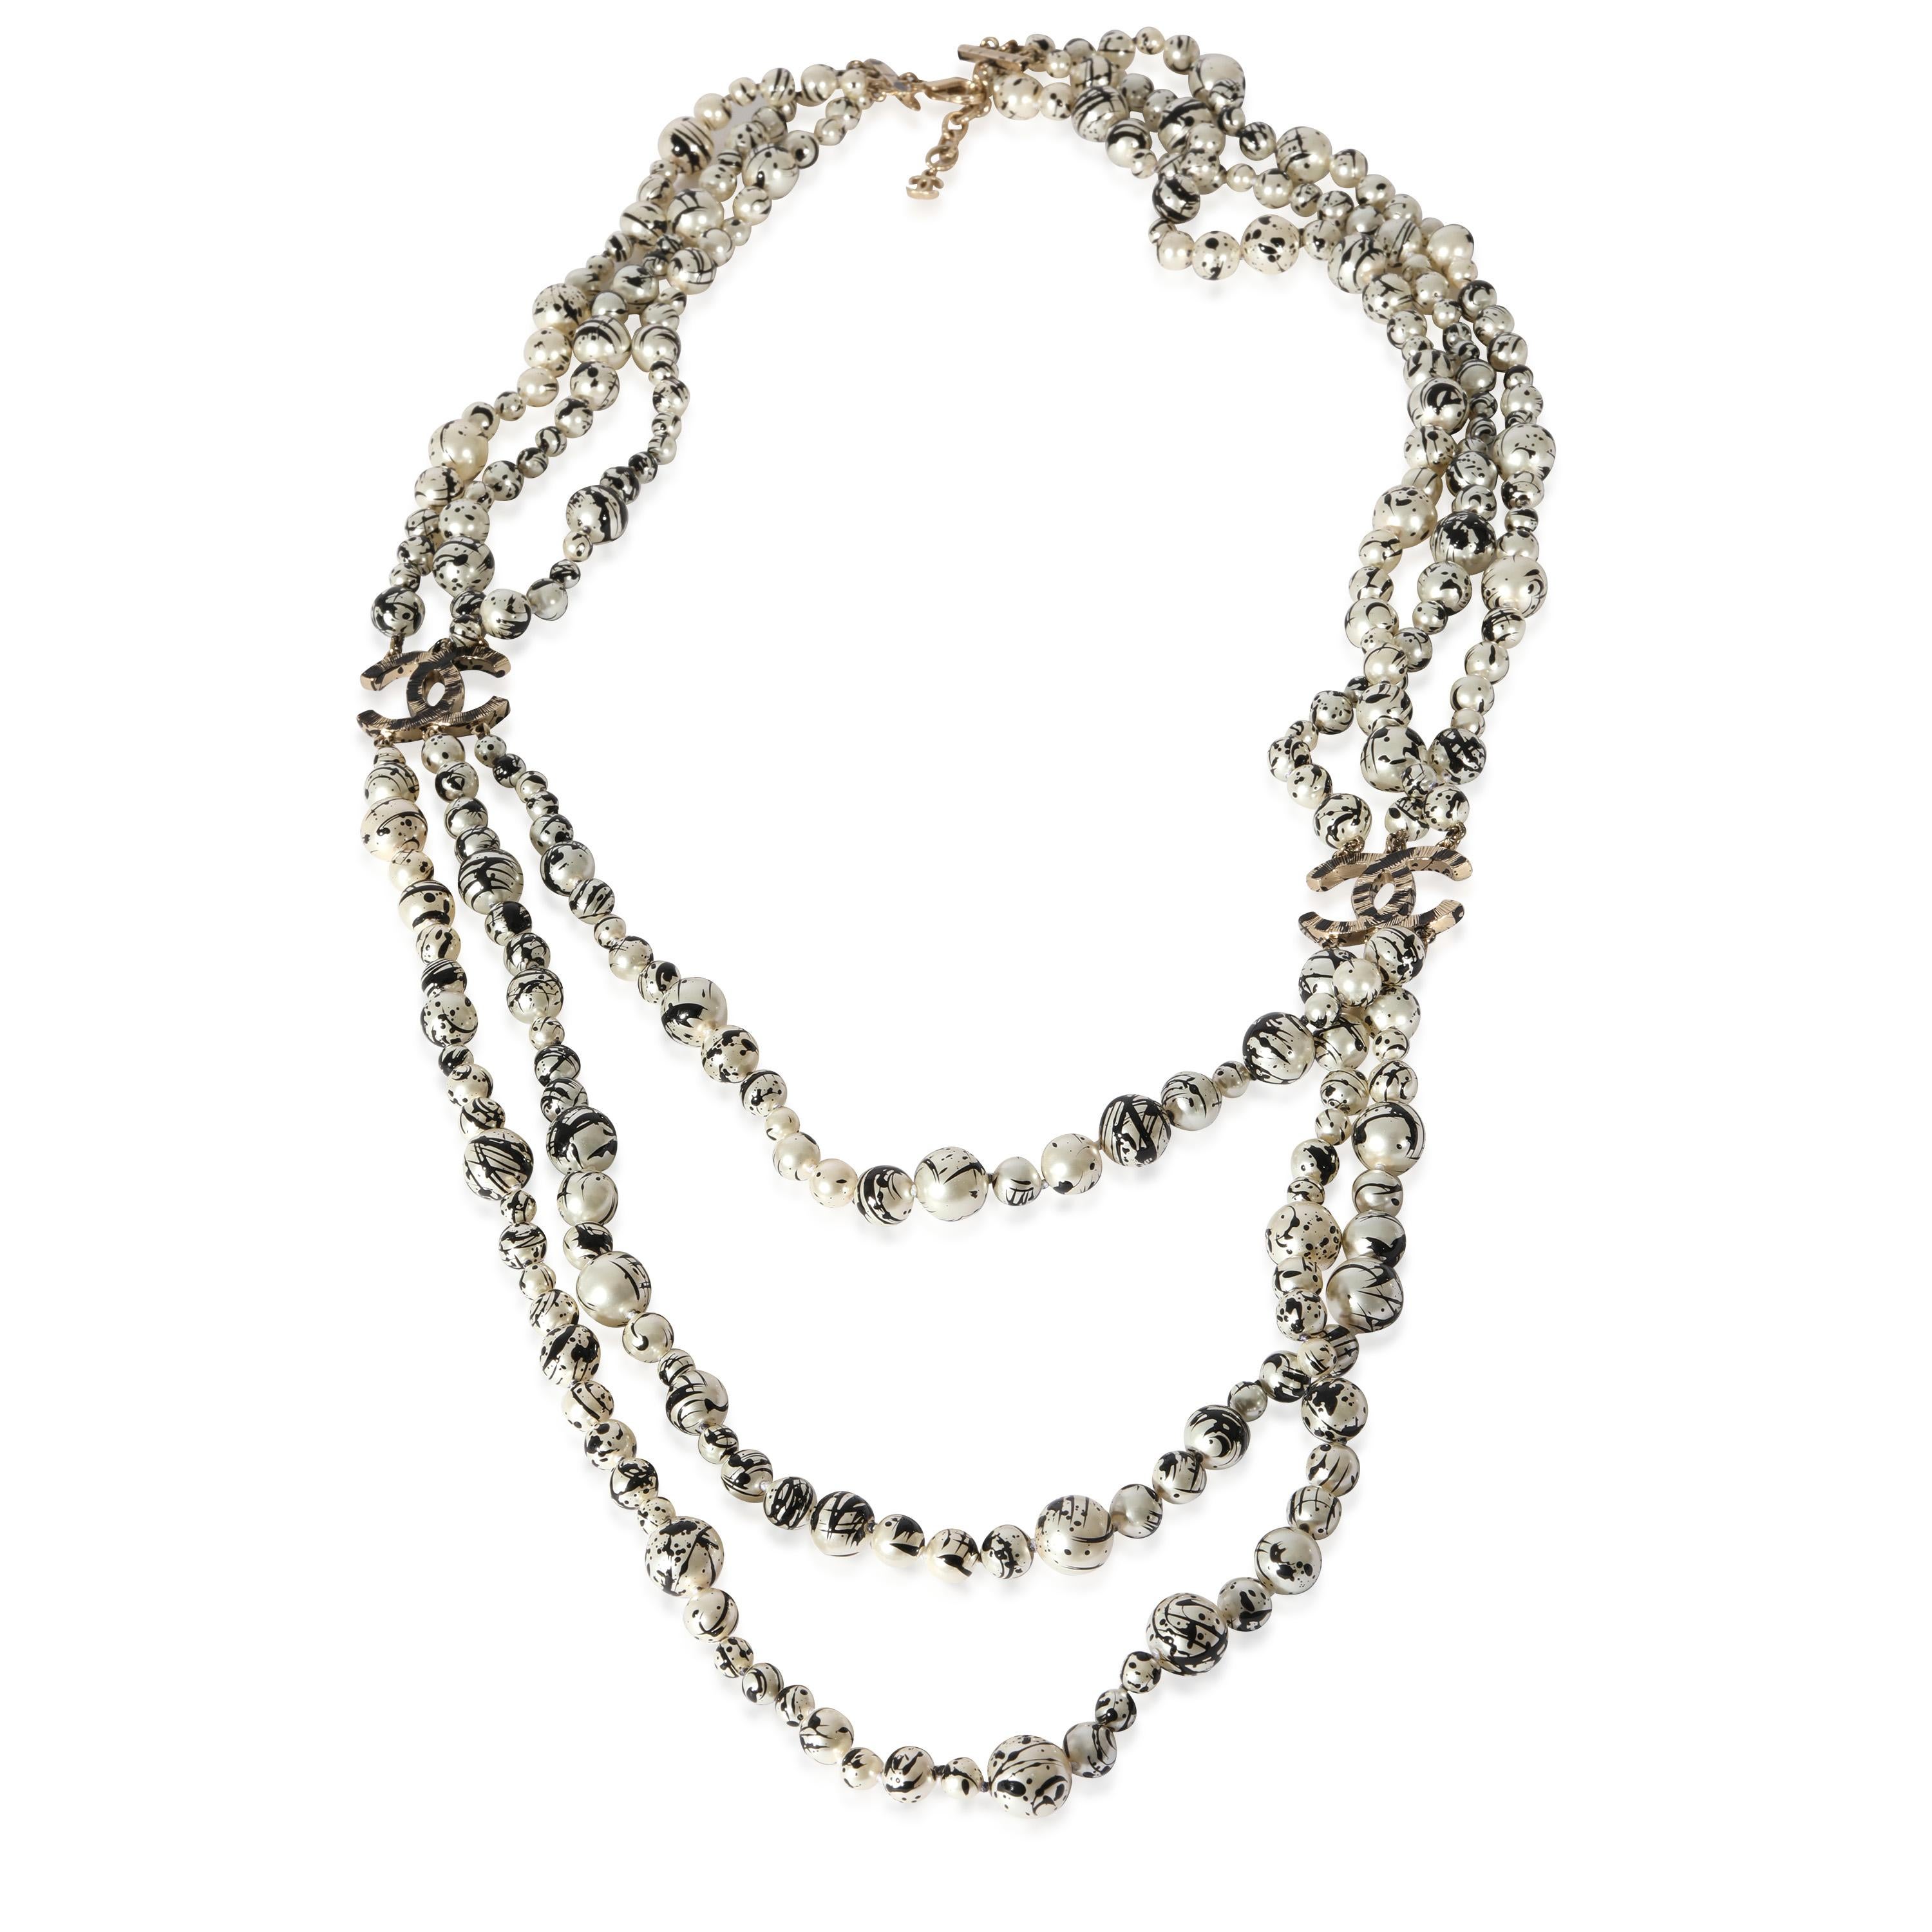 Chanel 2013 Faux Pearl Splatter CC Multistrand Necklace

PRIMARY DETAILS
SKU: 128062
Listing Title: Chanel 2013 Faux Pearl Splatter CC Multistrand Necklace
Condition Description: Retails for 2495 USD. In excellent condition. 35 inches in length.